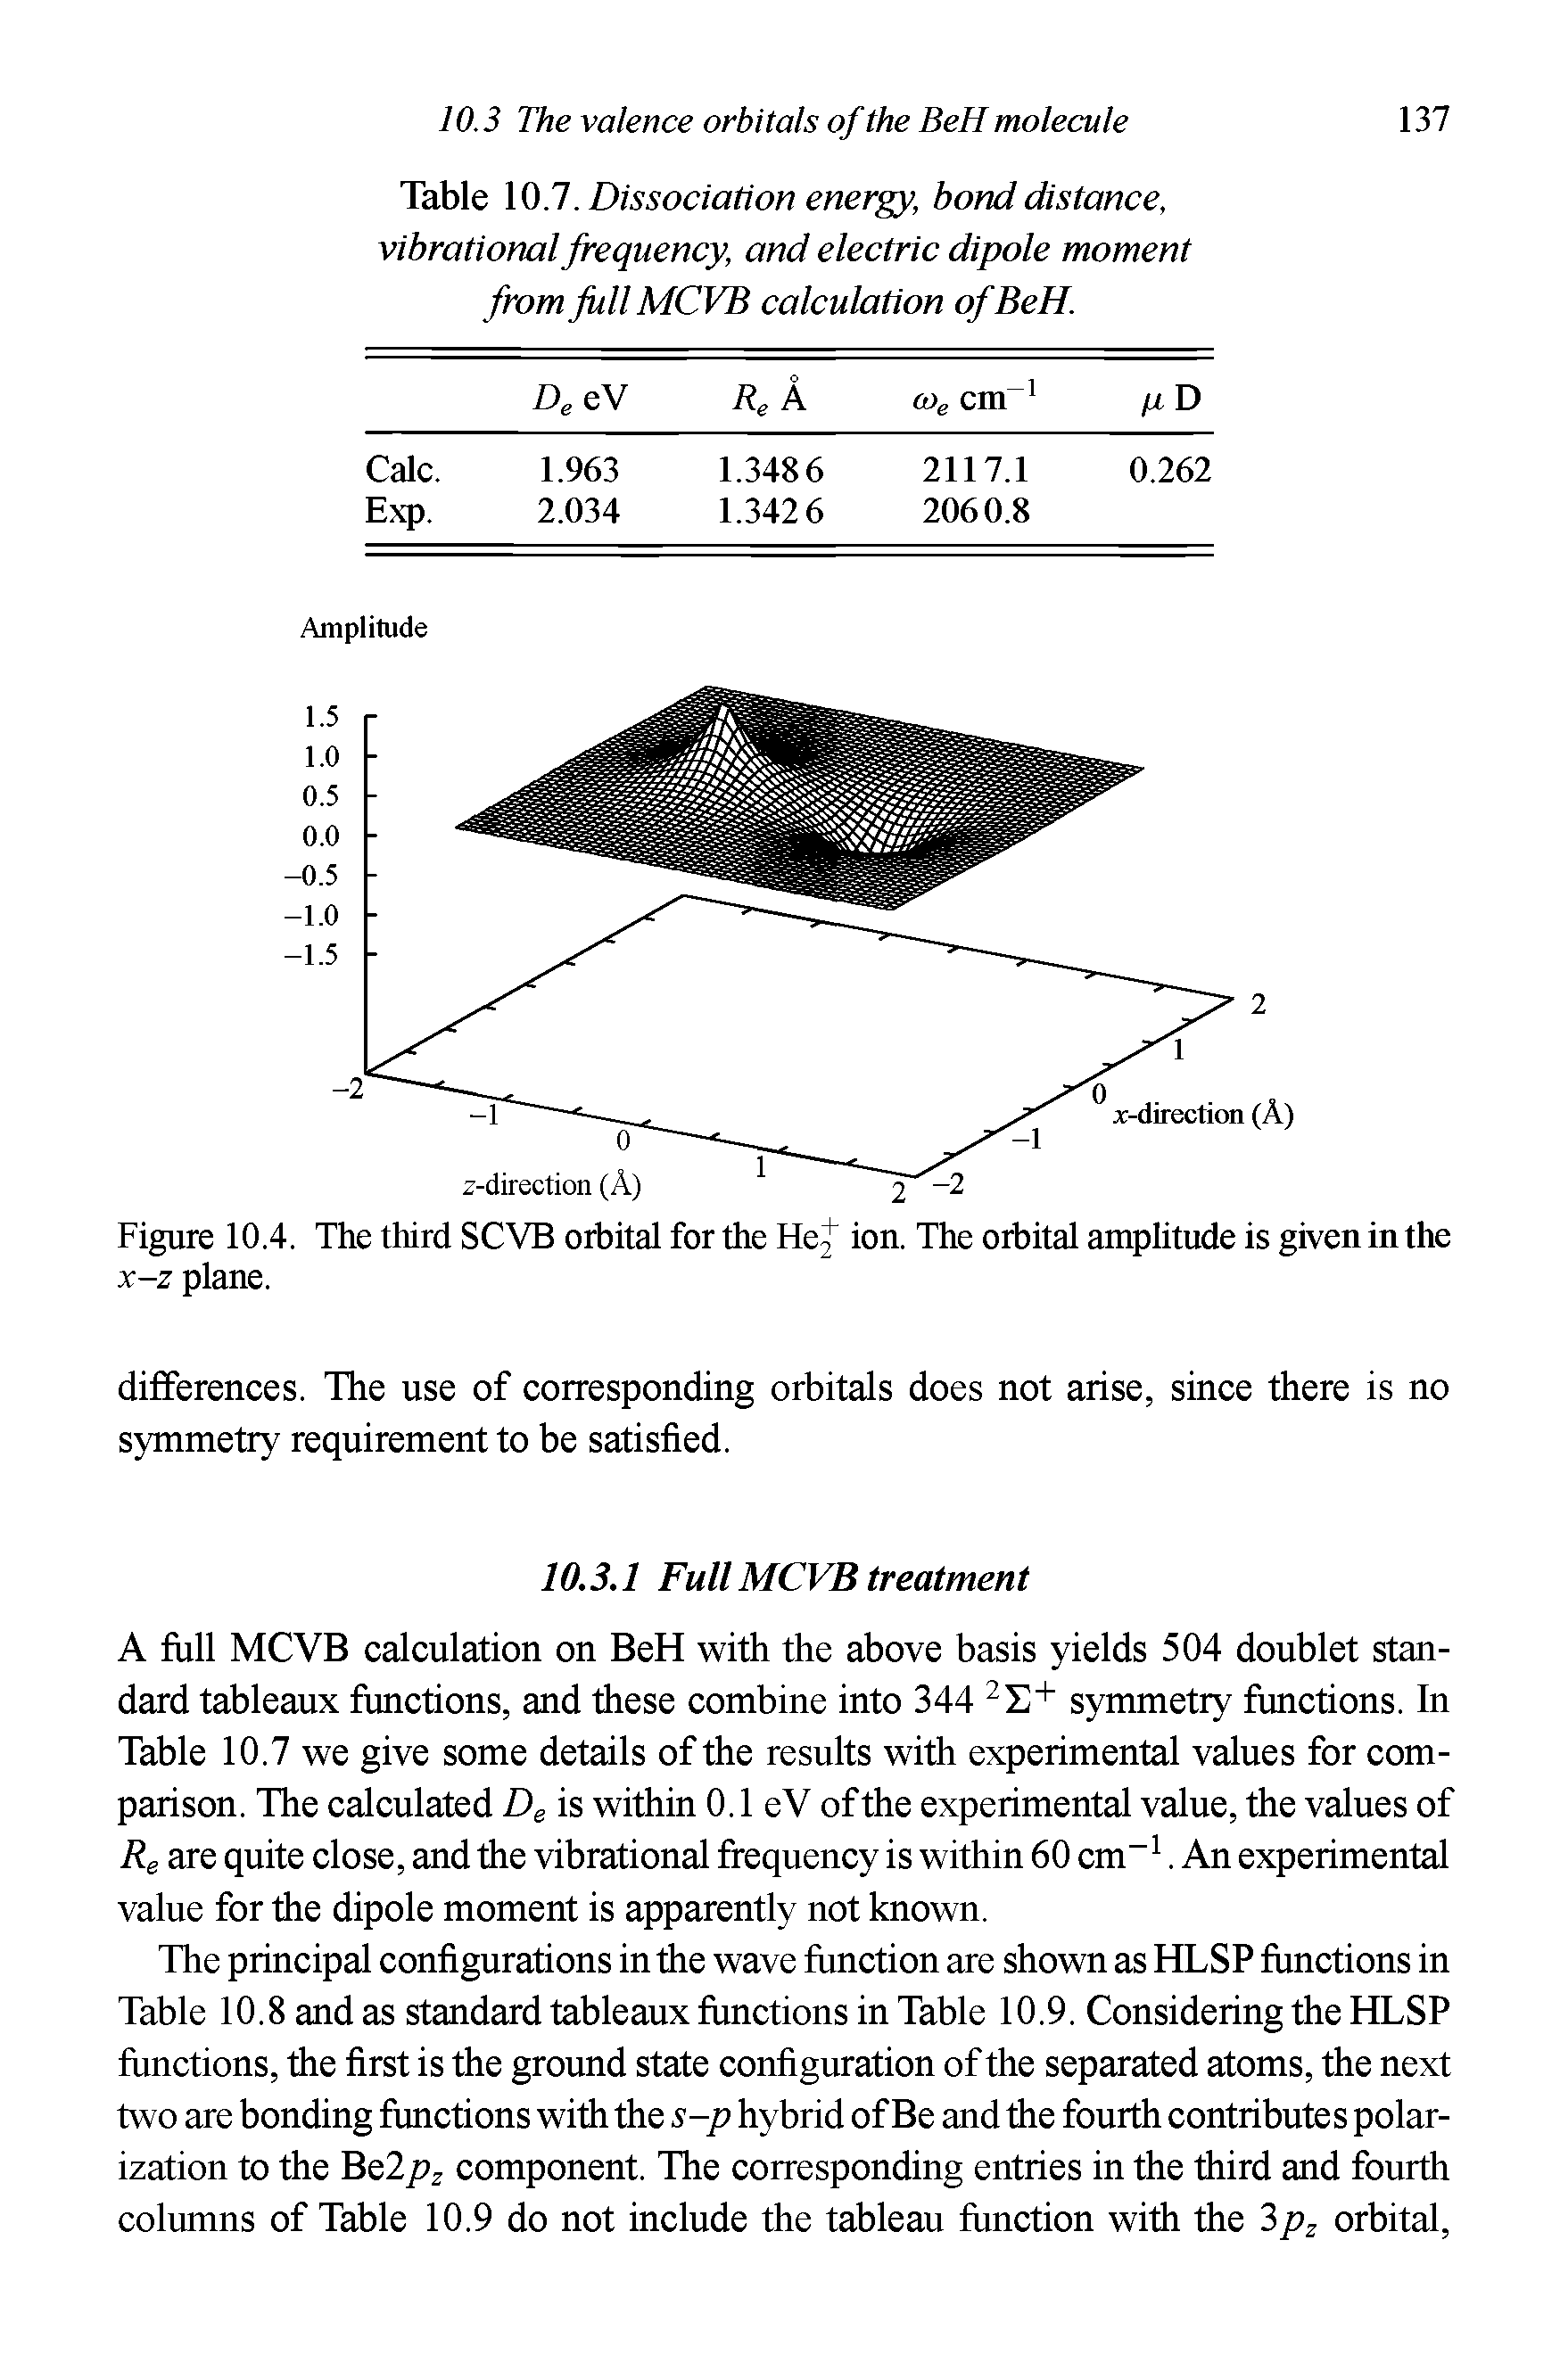 Table. Dissociation energy, bond distance, vibrational frequency, and electric dipole moment from fullMCVB calculation of BeH.